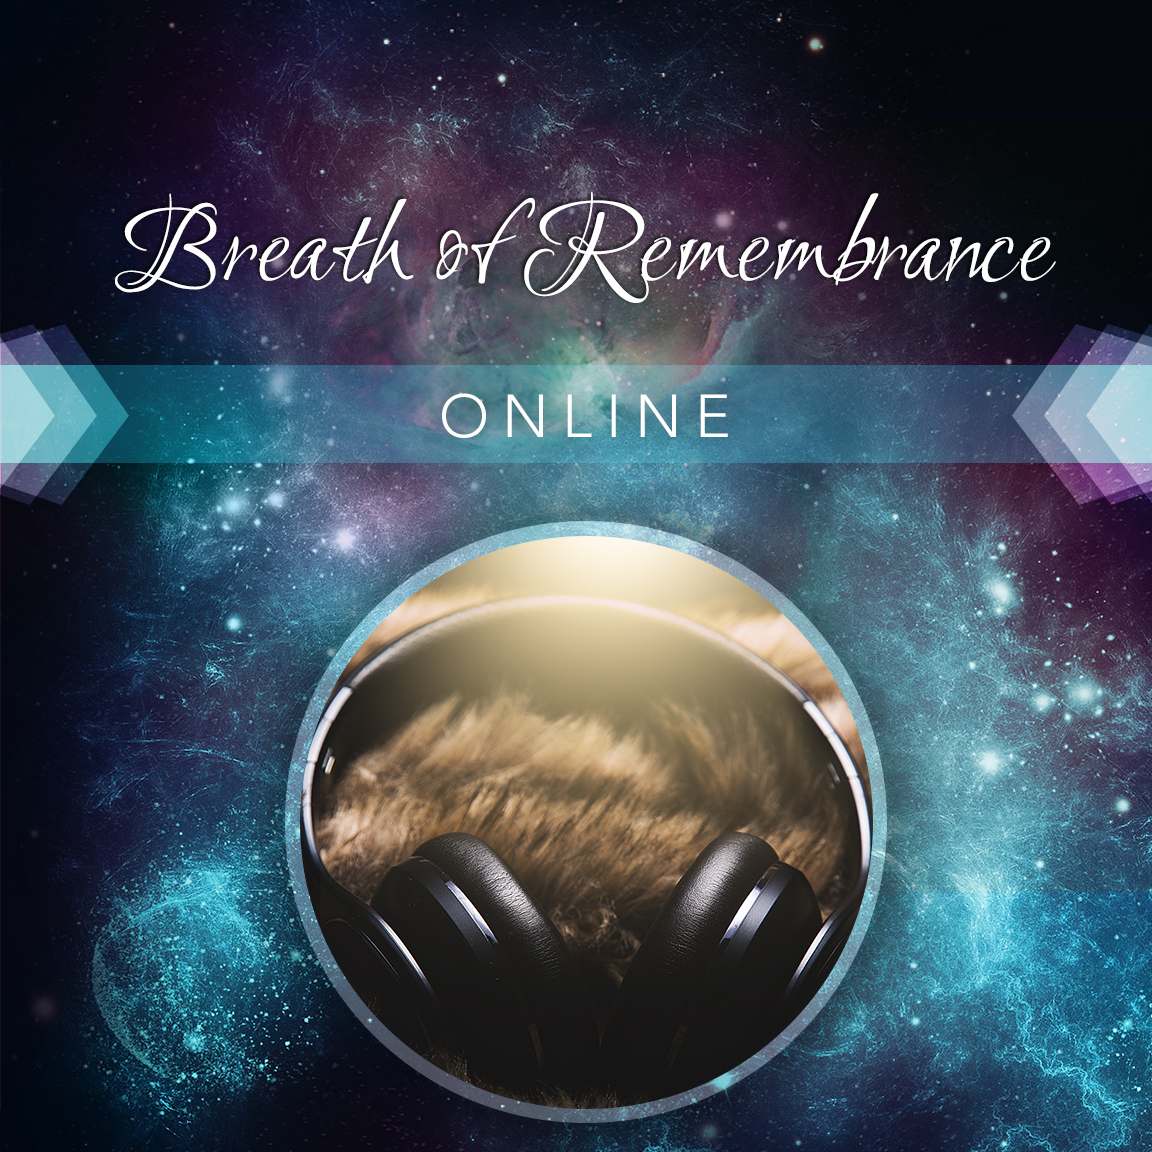 Online Breathwork Sessions - Breath of Remembrance